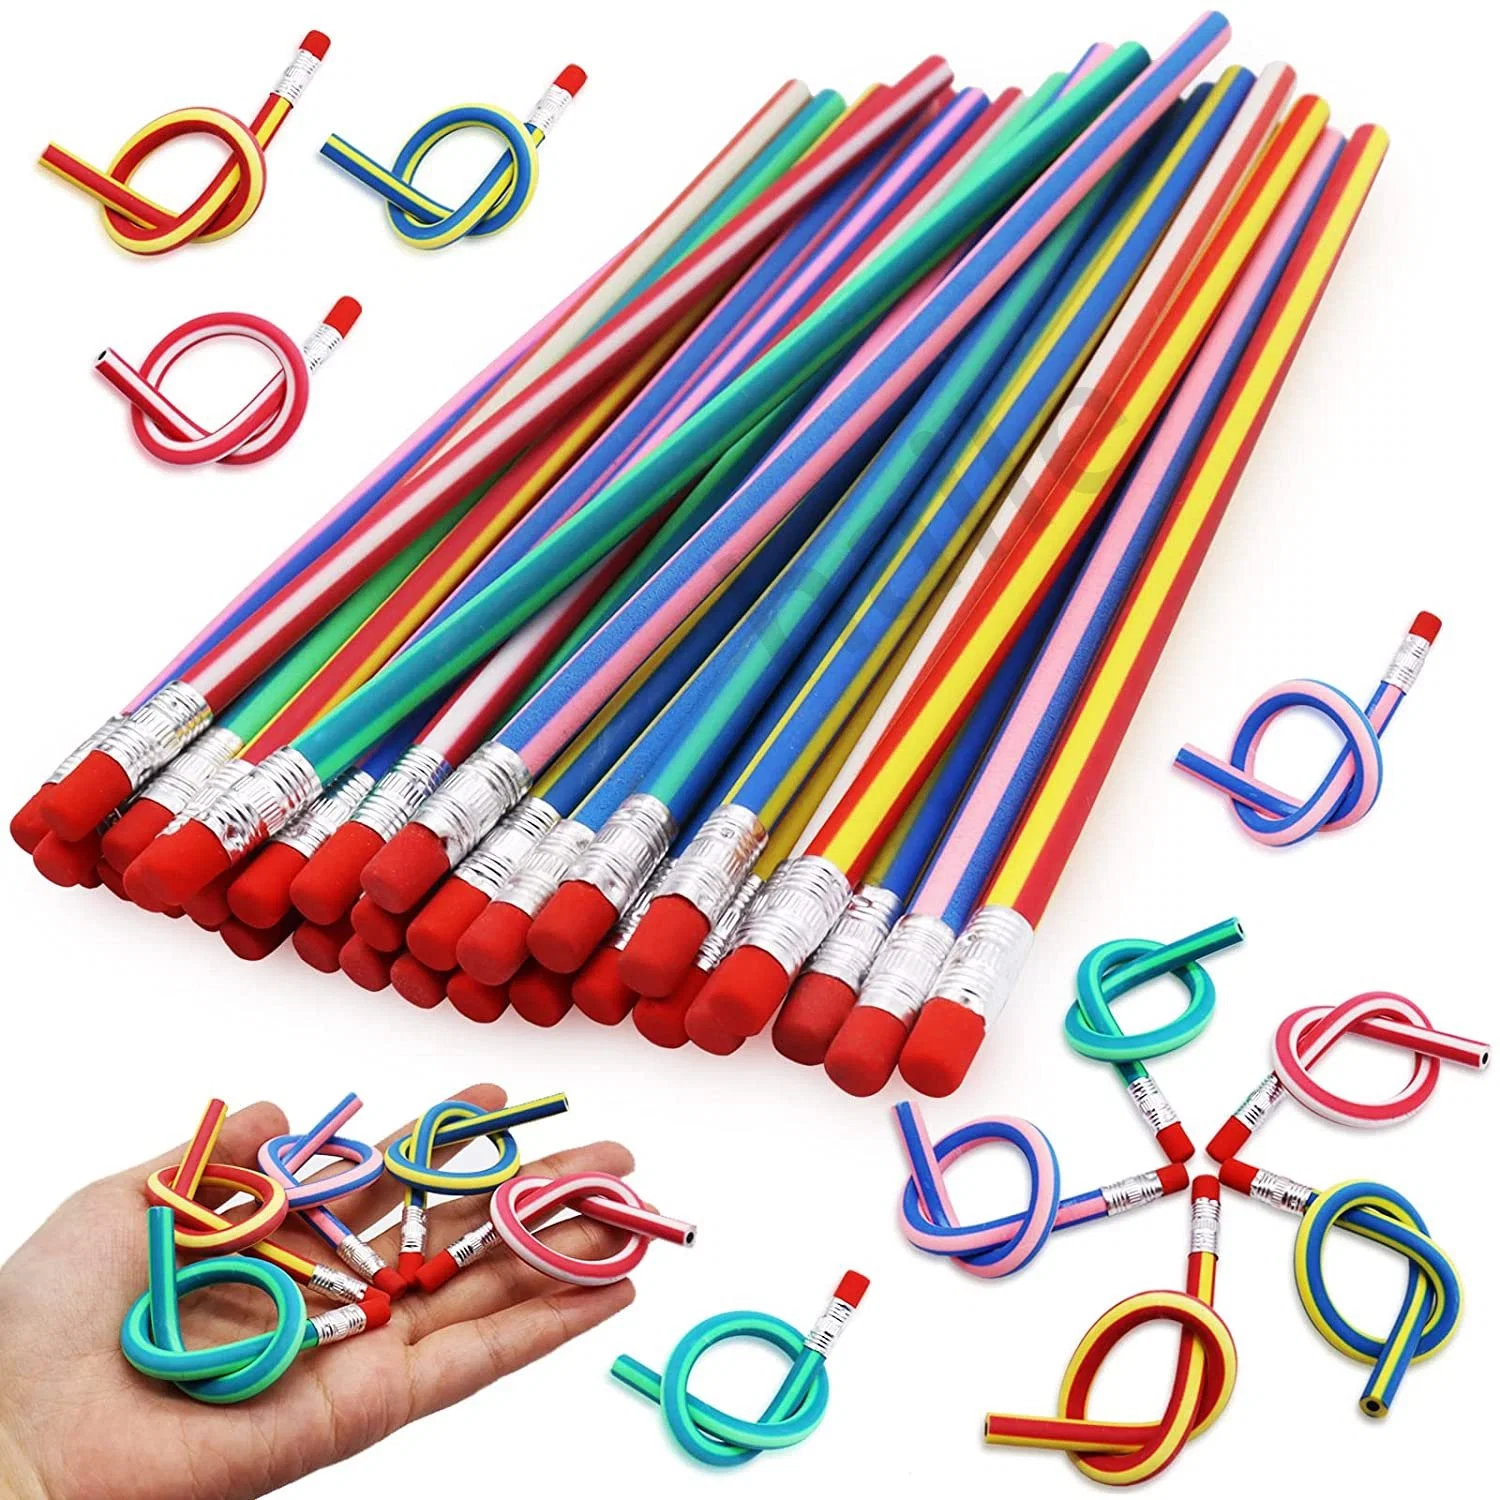 Ruunjoy Soft Bendable Pencils for Kids Pencil with Eraser Stationery for School Student Writing Drawing Pens School Supplies